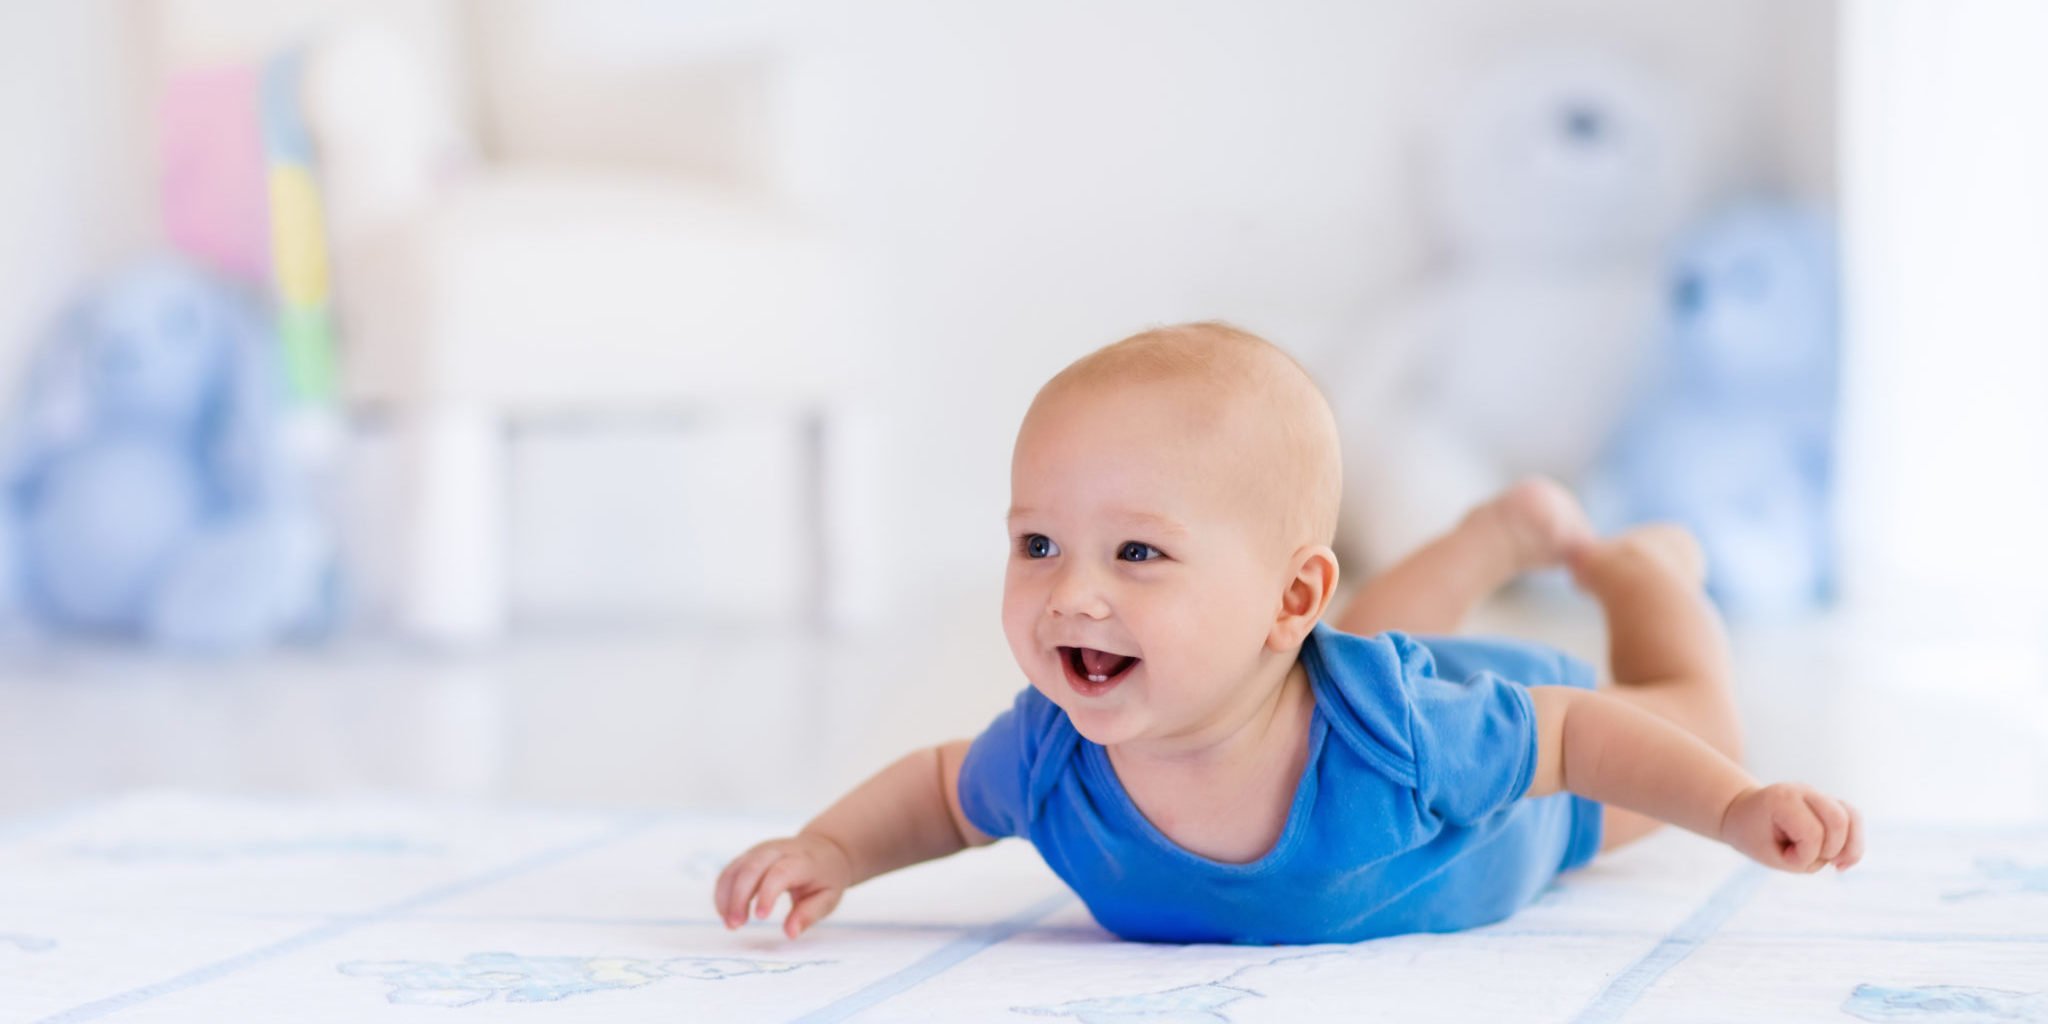 5 Important Reasons Your Baby Needs Healthy Tummy Time